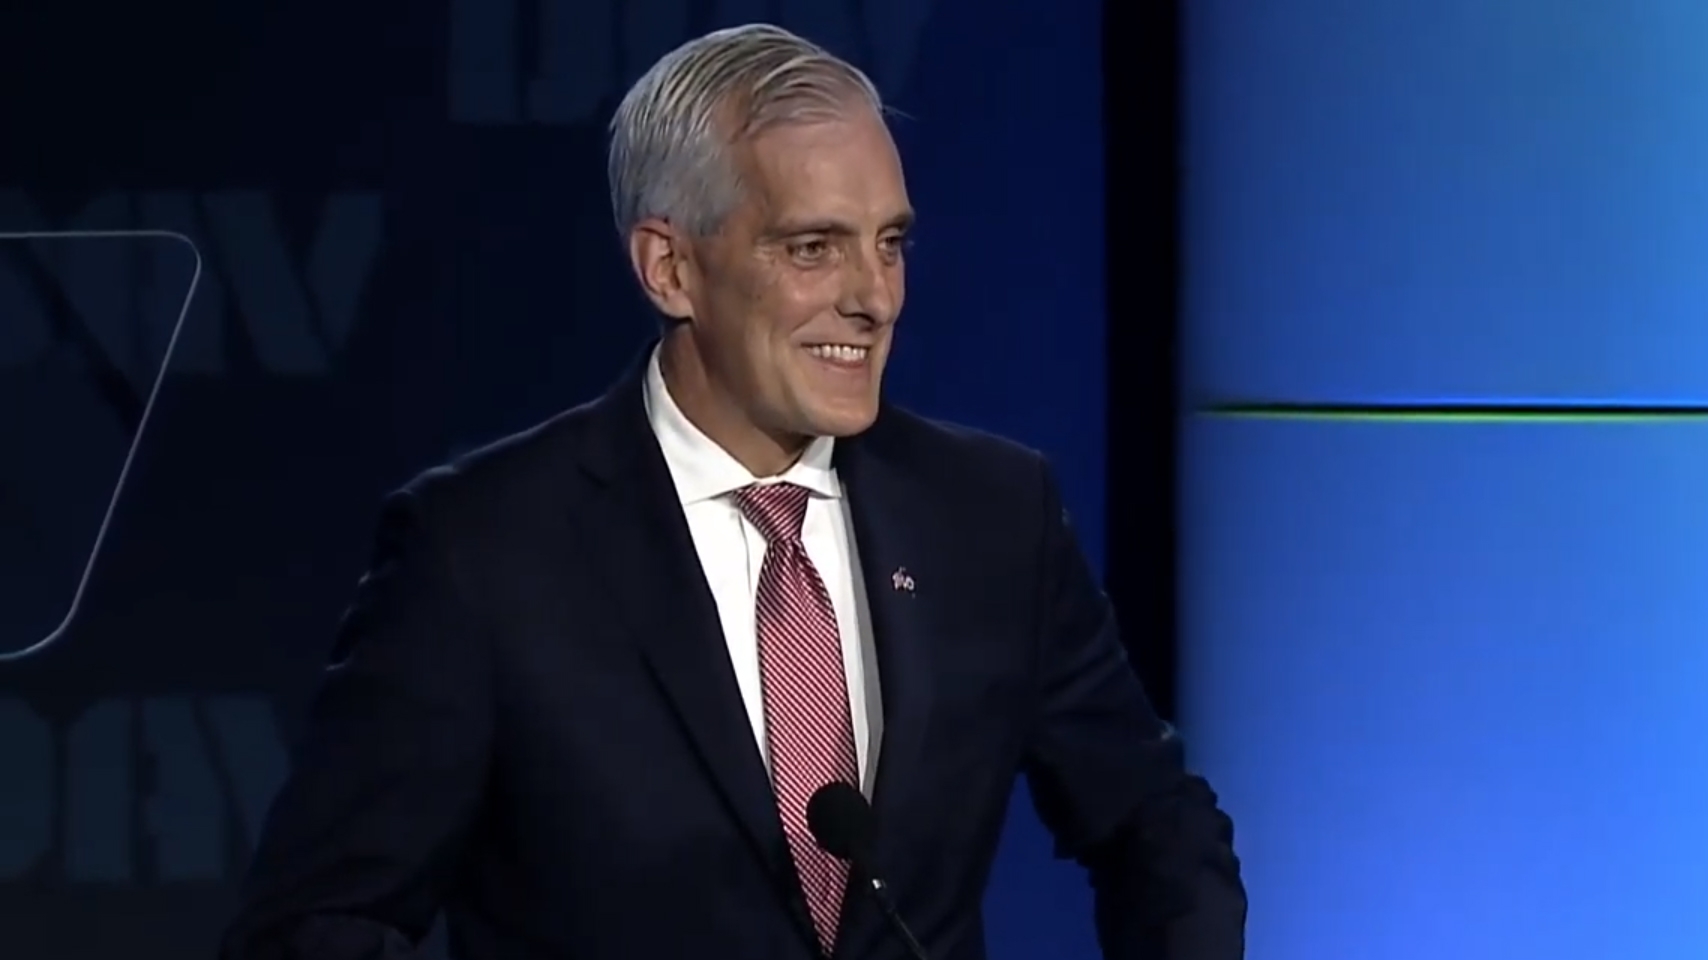 Nearly every COVID-19 death in the Veteran community and U.S. as a whole is entirely preventable through getting a vaccine, VA Secretary Denis McDonough said July 31 at the DAV National Convention in Tampa.